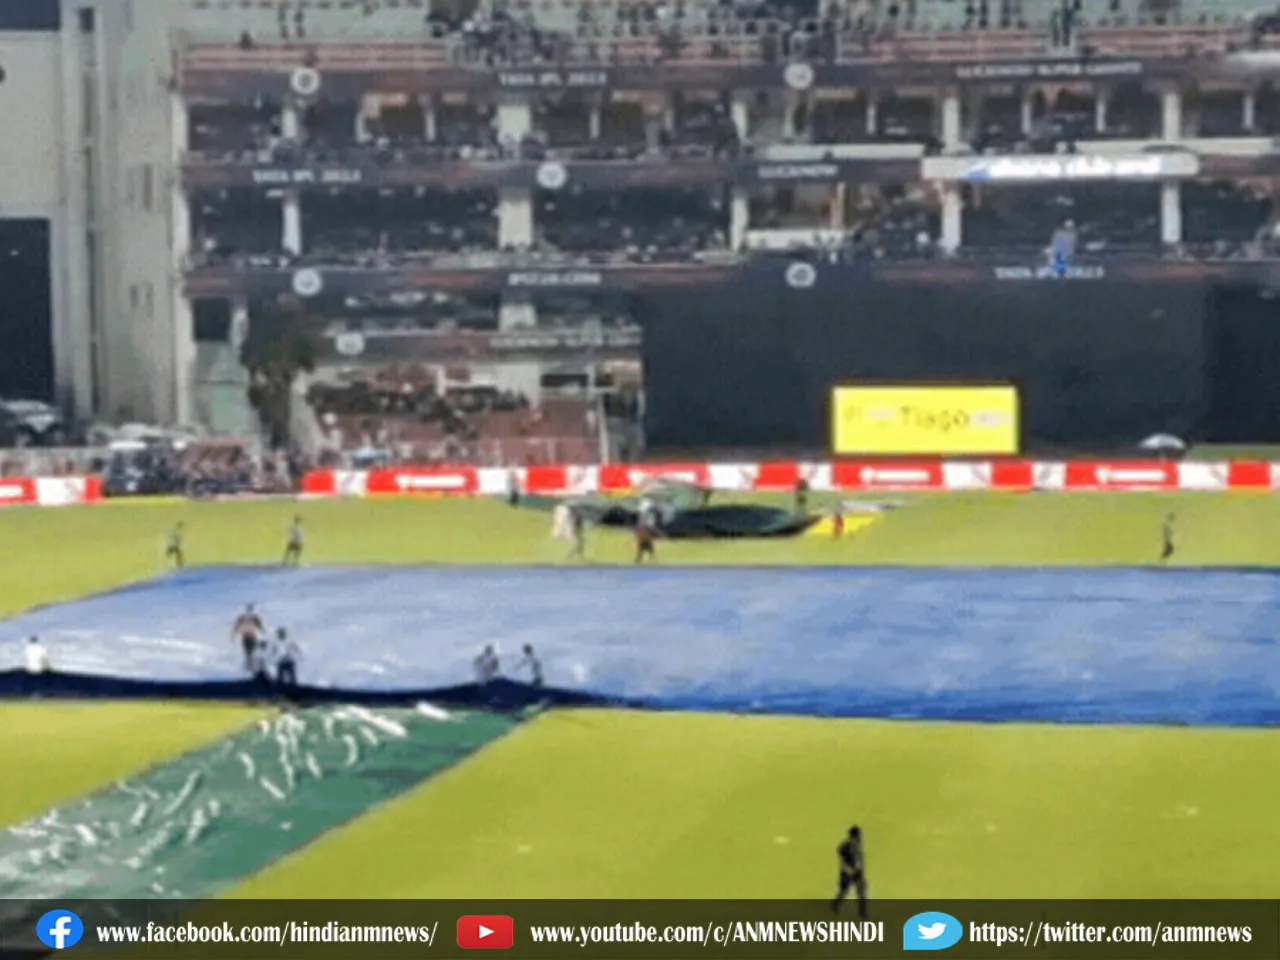 Match stopped due to rain